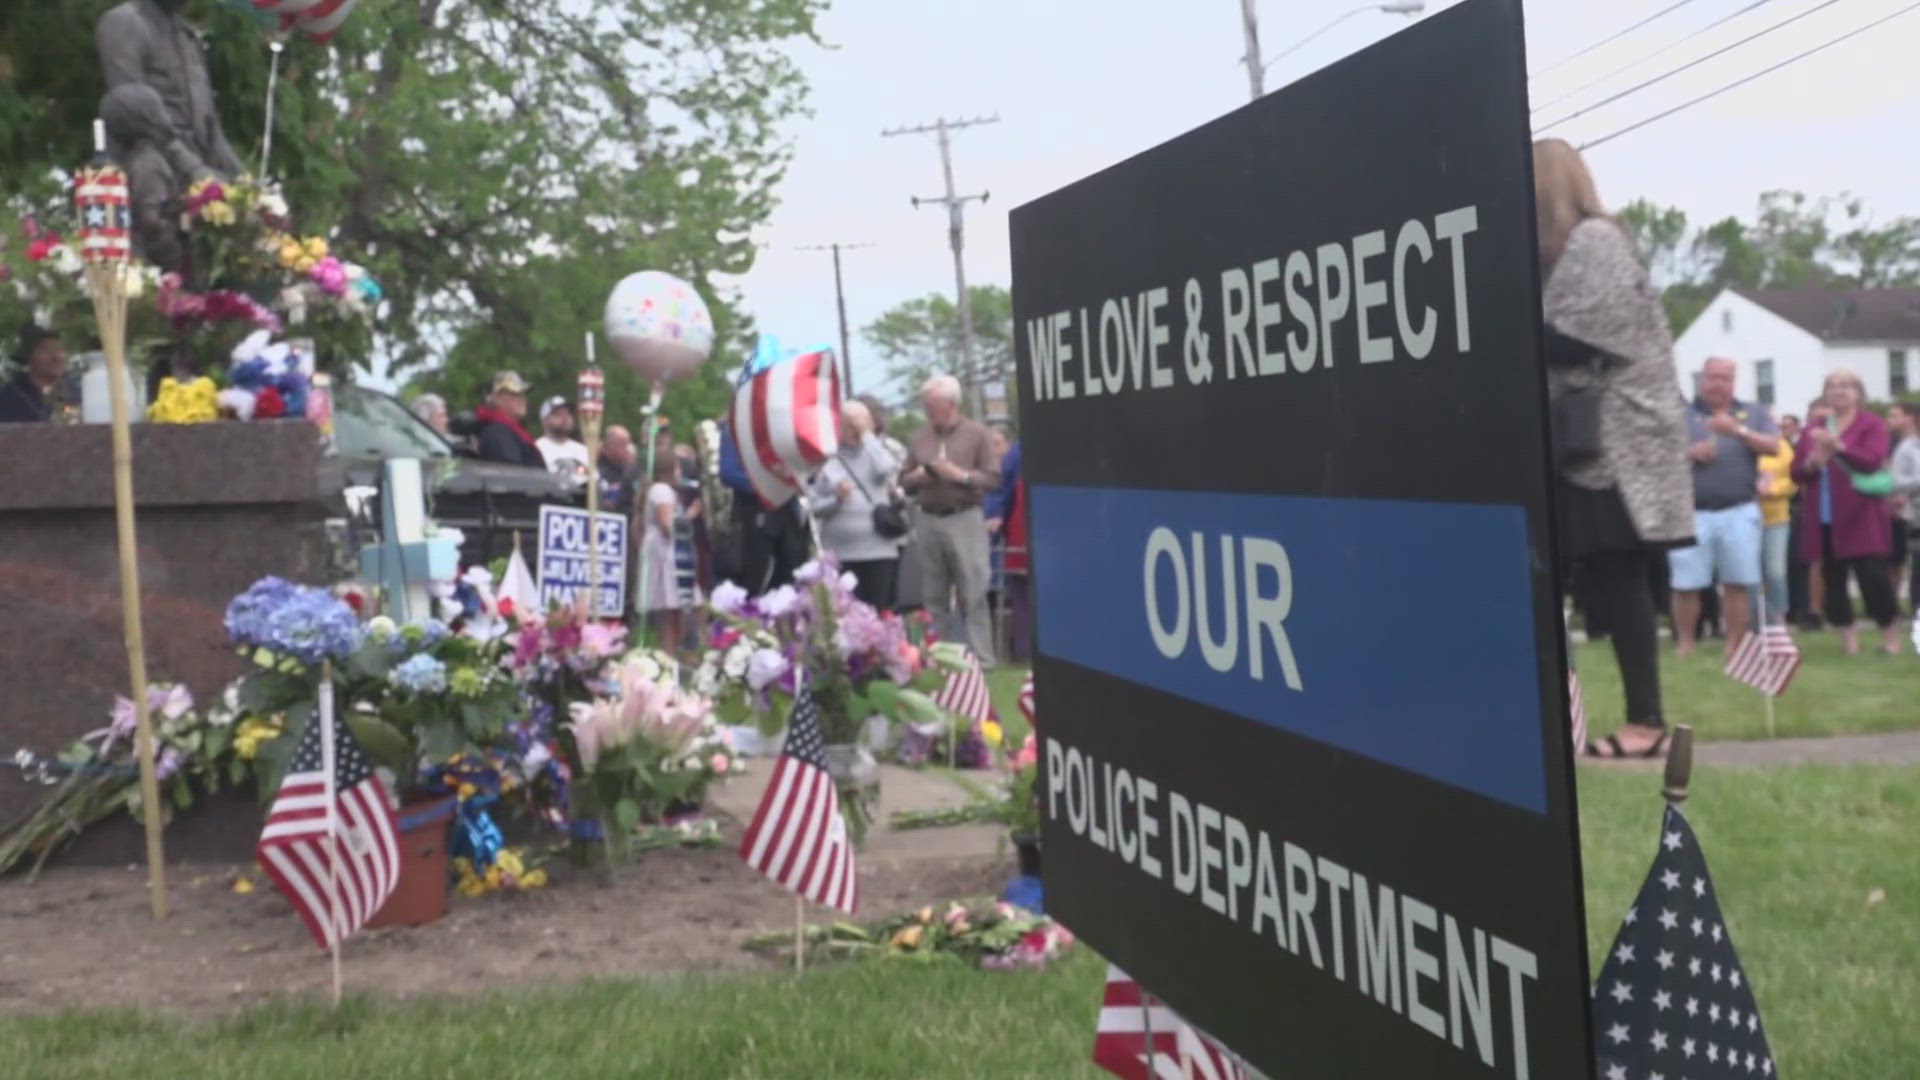 Tonight's vigil took place at the Euclid Police Department. A second vigil in Cuyahoga Heights will take place on Thursday.